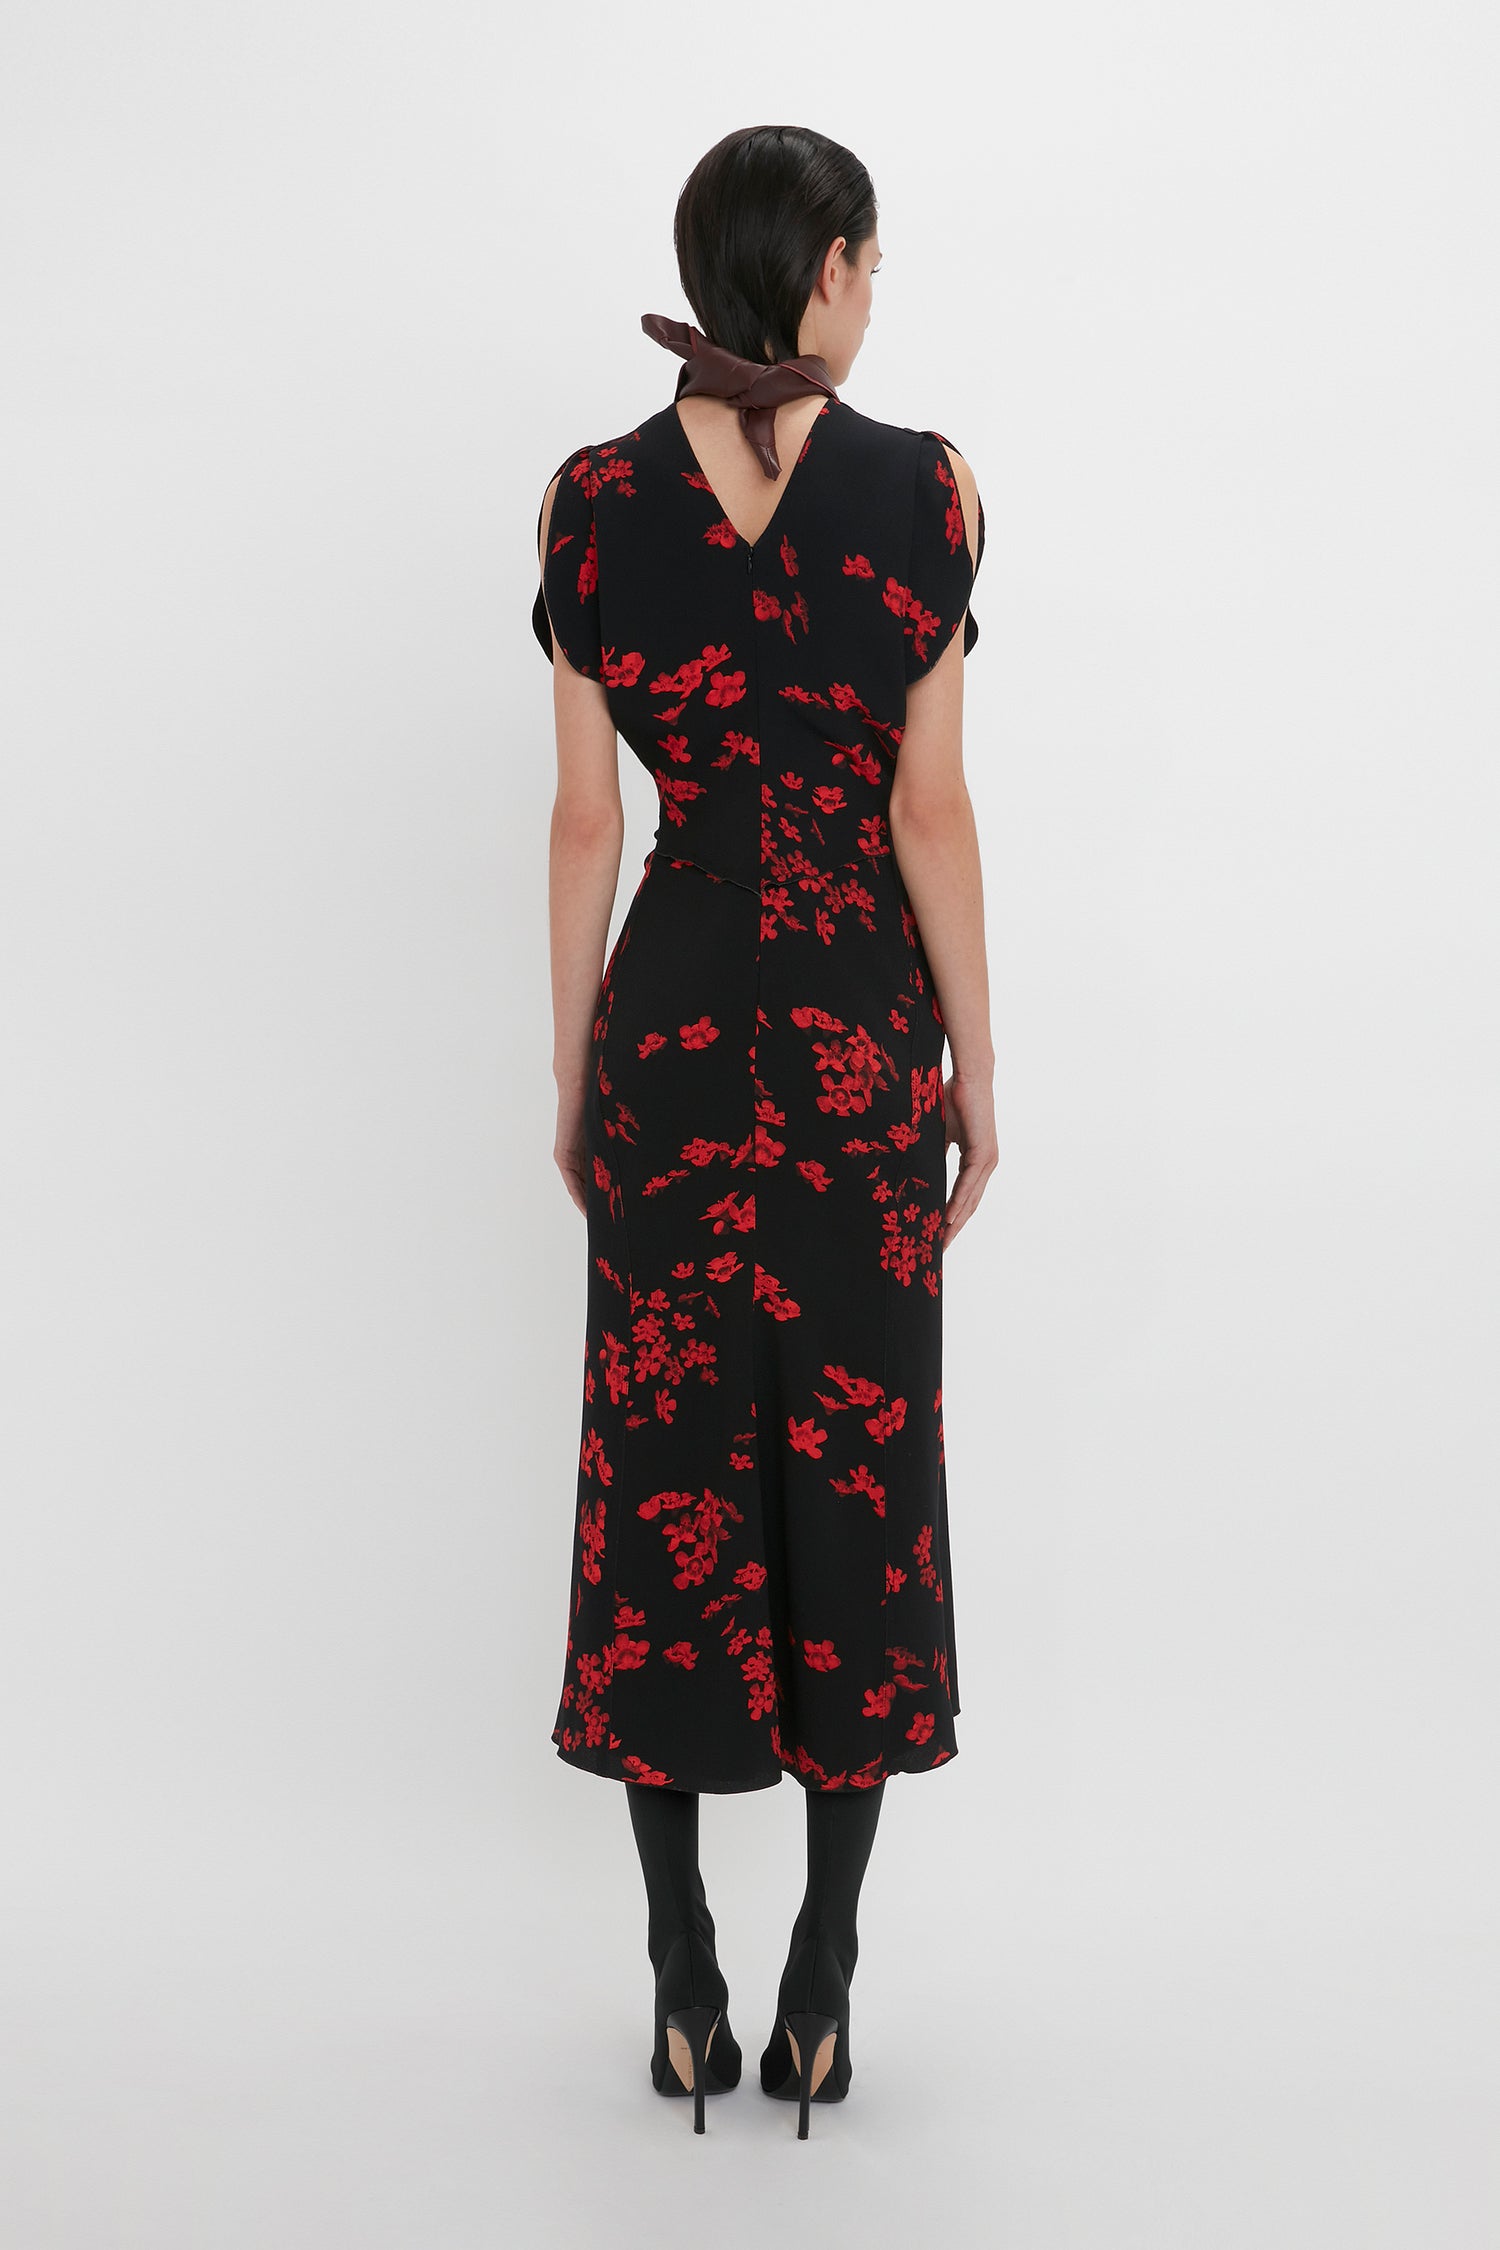 A person with dark hair is standing with their back facing the camera, wearing a Victoria Beckham Gathered Waist Midi Dress In Sci-Fi Black Floral, black stockings, and black high-heeled shoes.